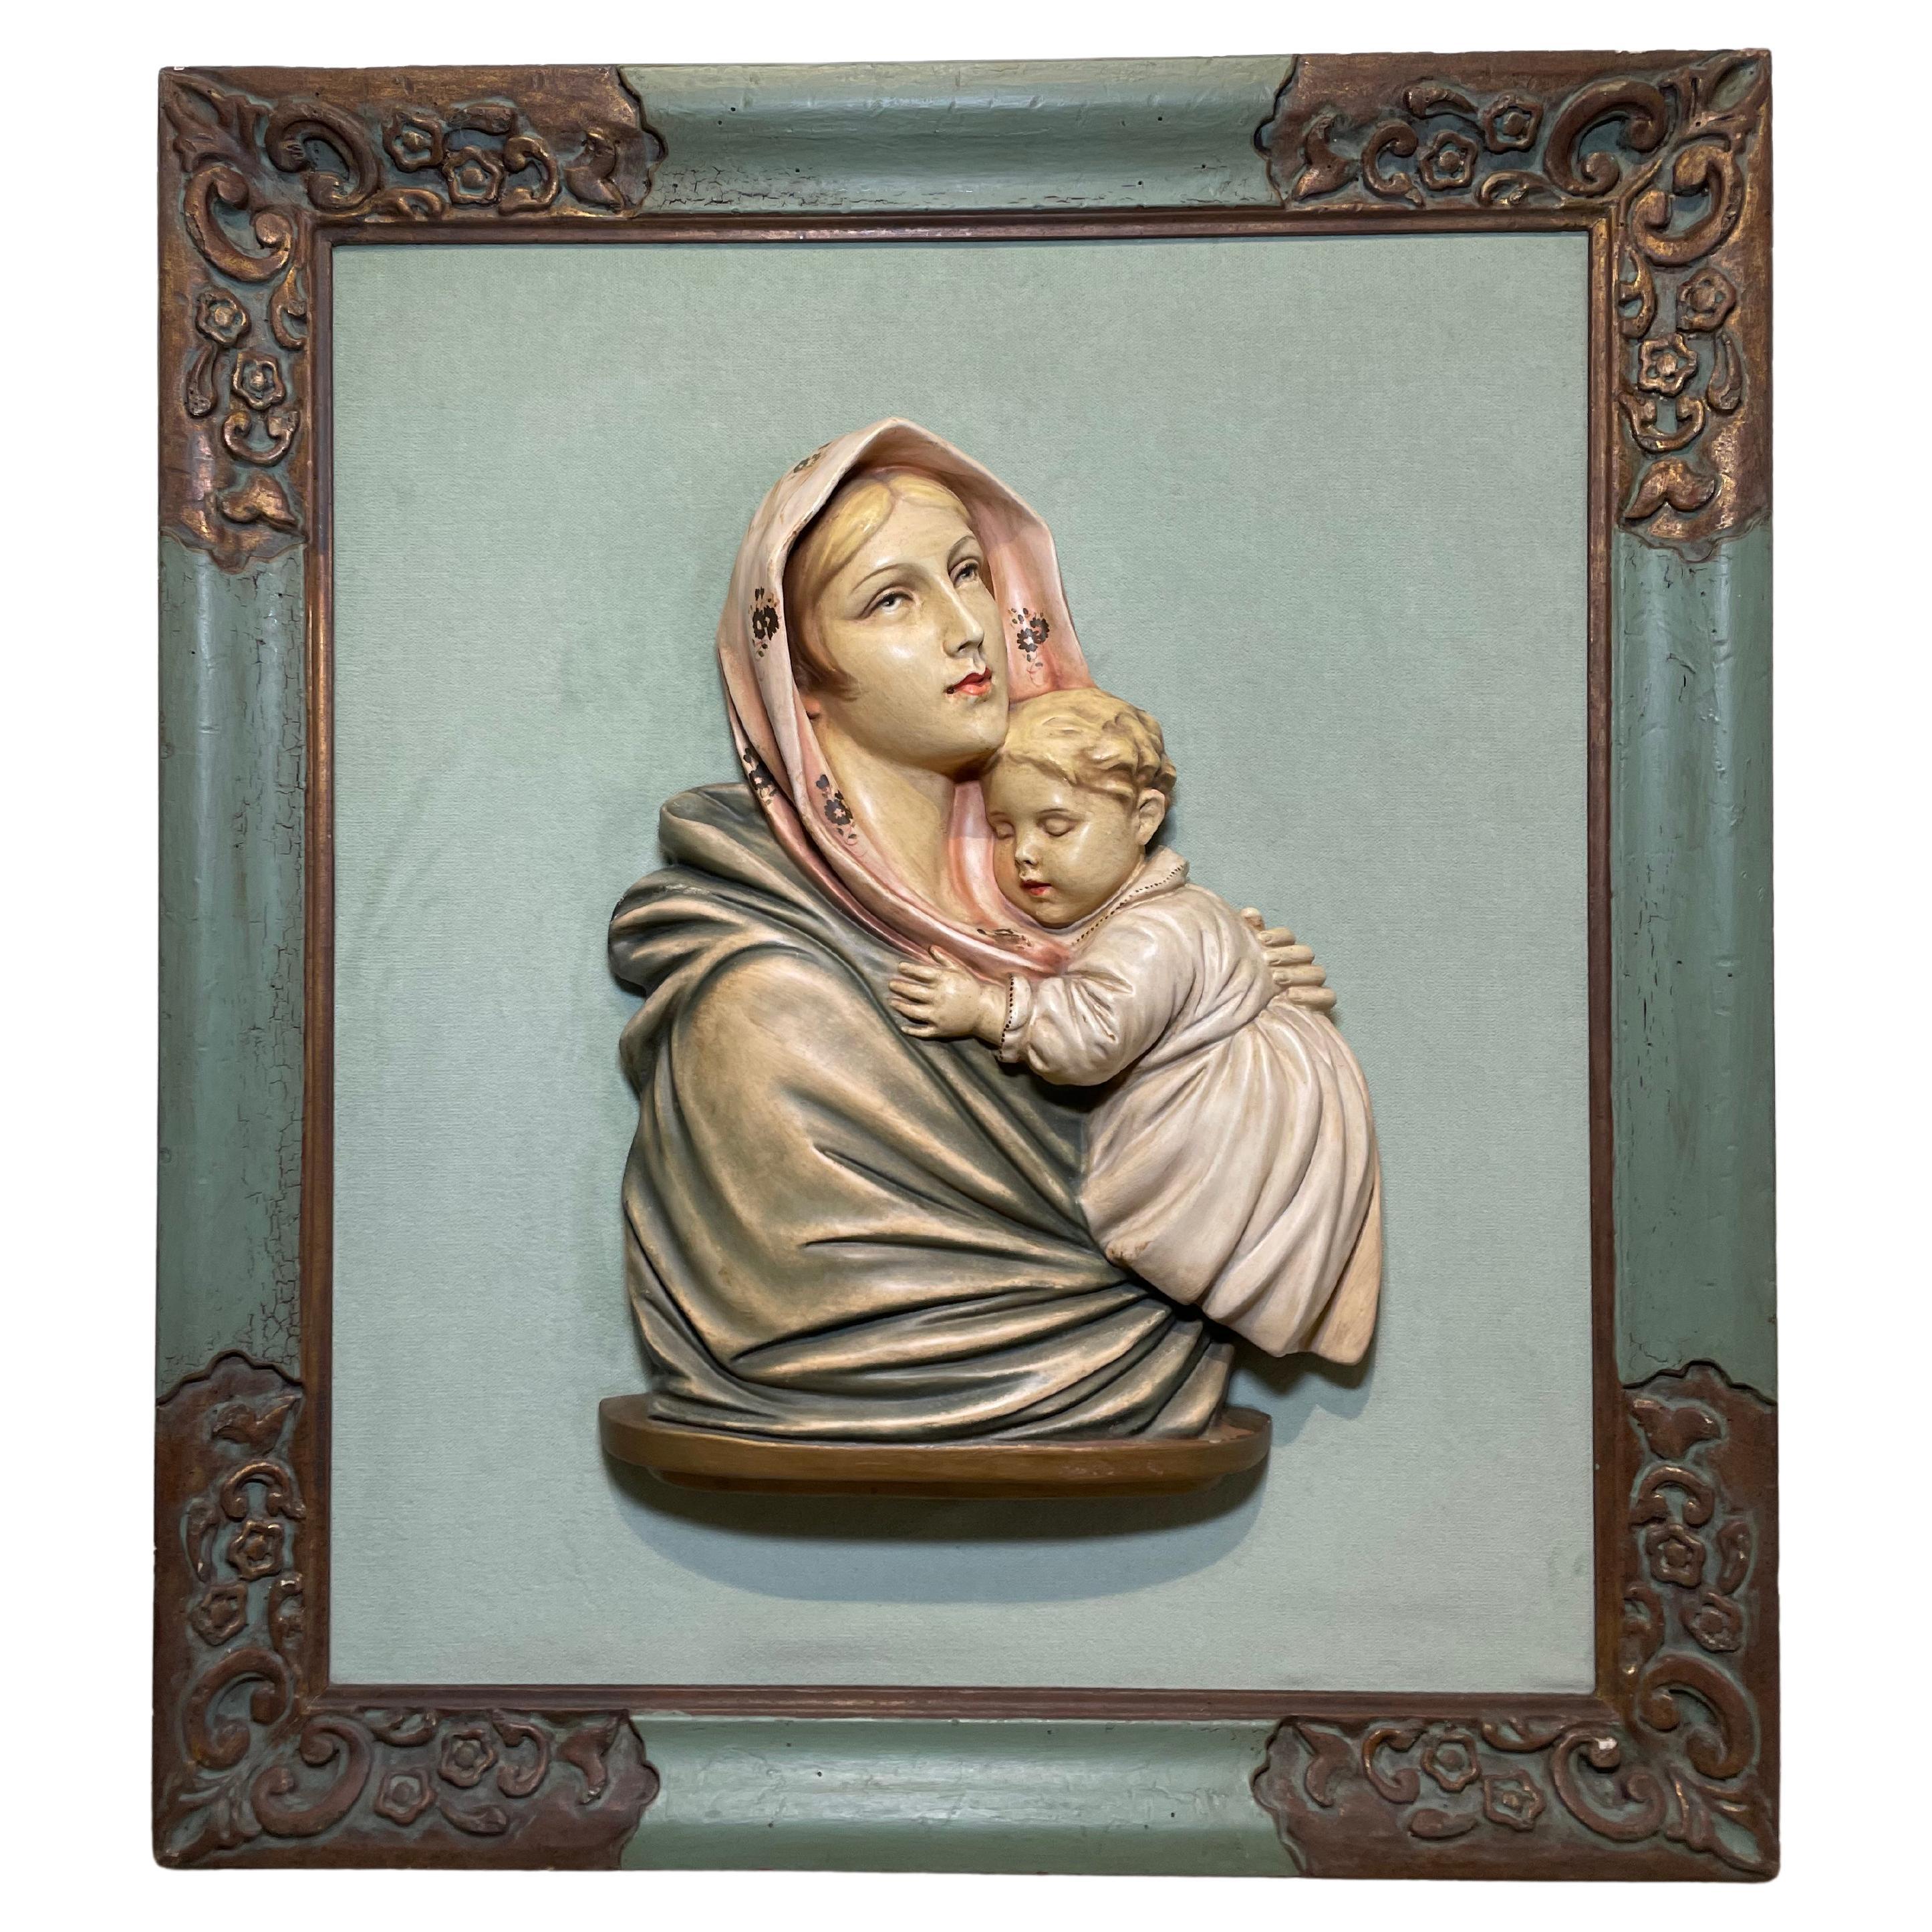 Virgin Mary and Baby Jesus Ceramic Sculpture/Relief Frame For Sale